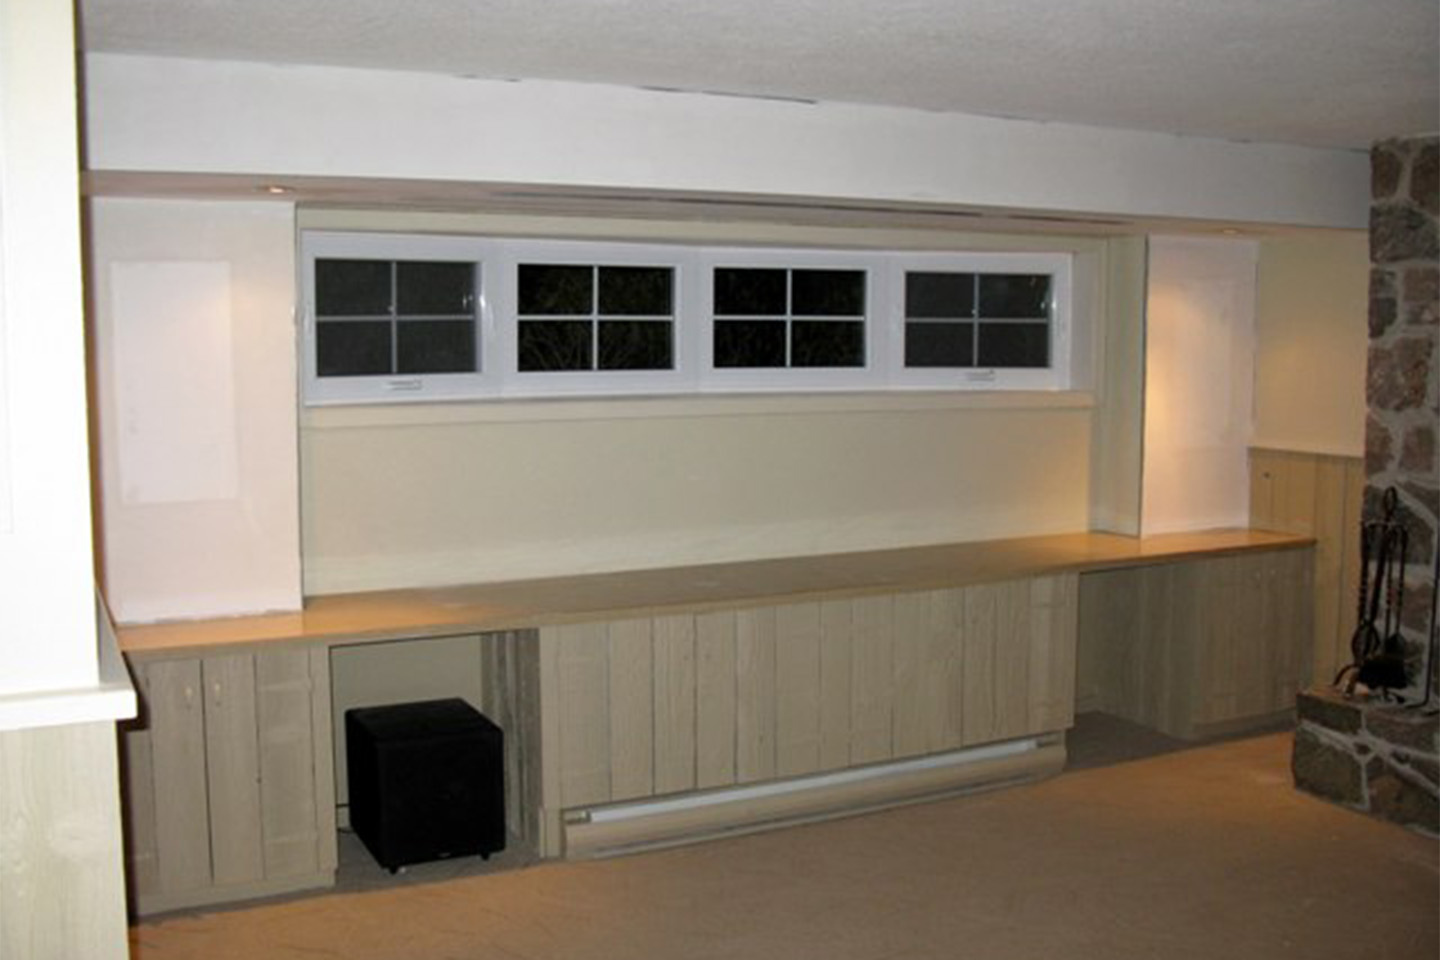 6. In-Wall Speakers and Retractable Screen